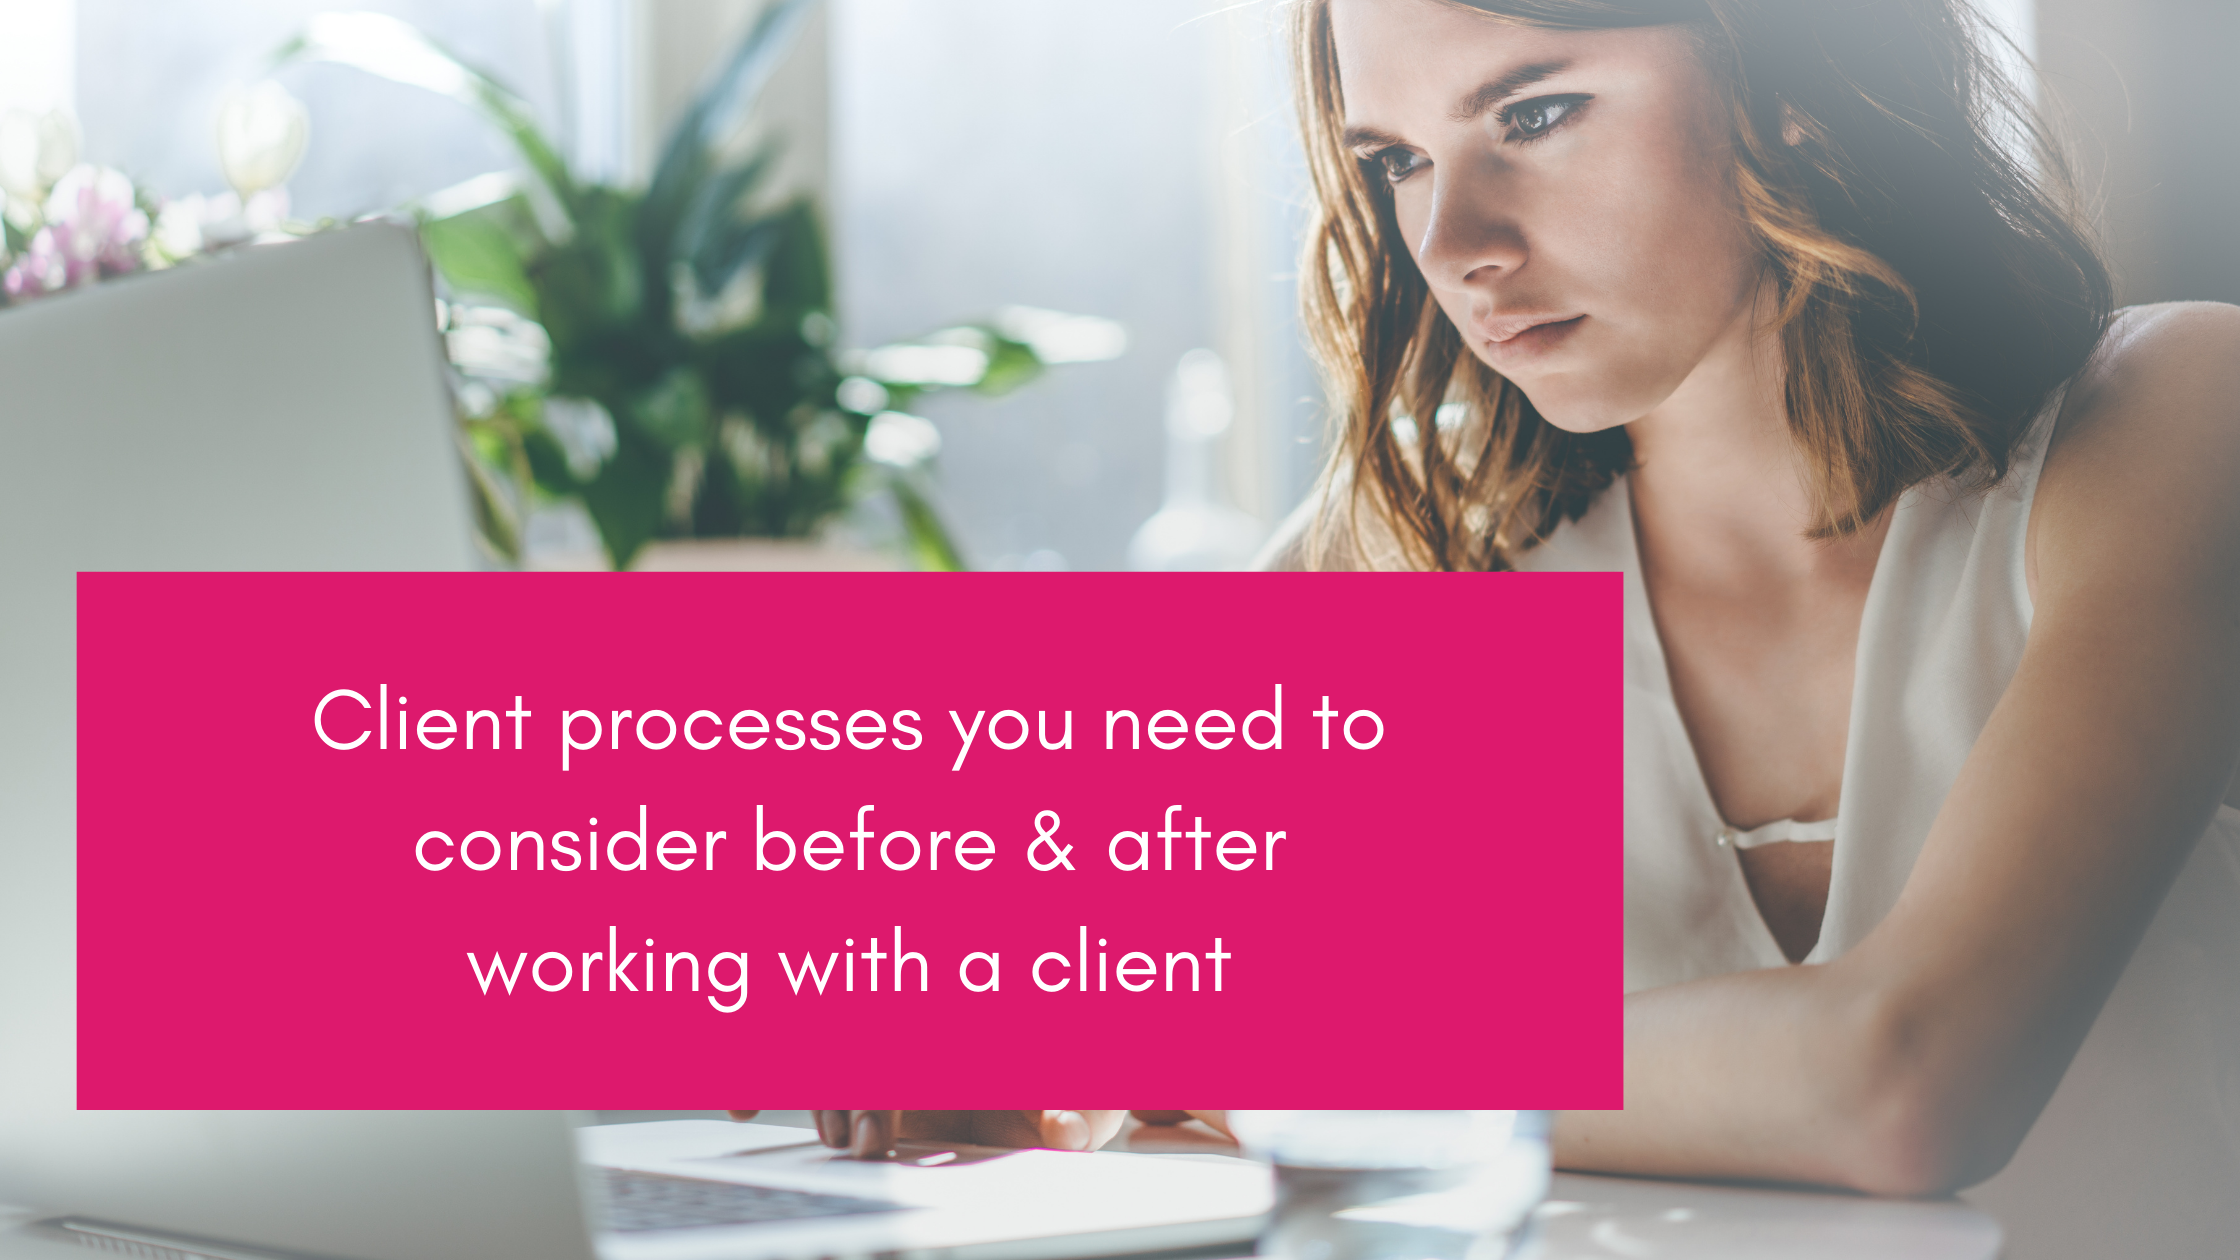 Client processes you need to consider before after working with a client